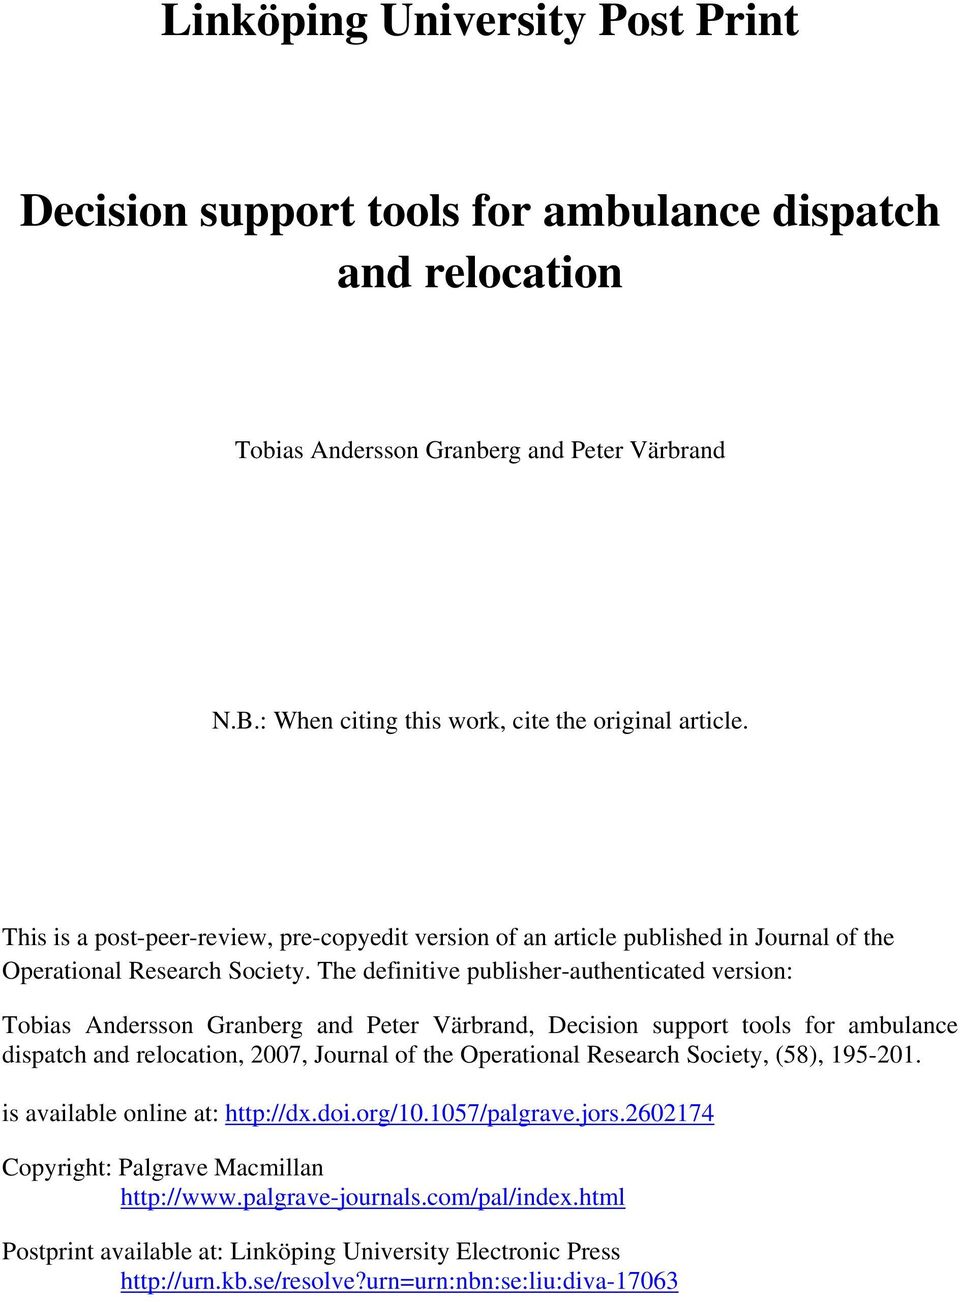 The definitive publisher-authenticated version: Tobias Andersson Granberg and Peter Värbrand, Decision support tools for ambulance dispatch and relocation, 2007, Journal of the Operational Research